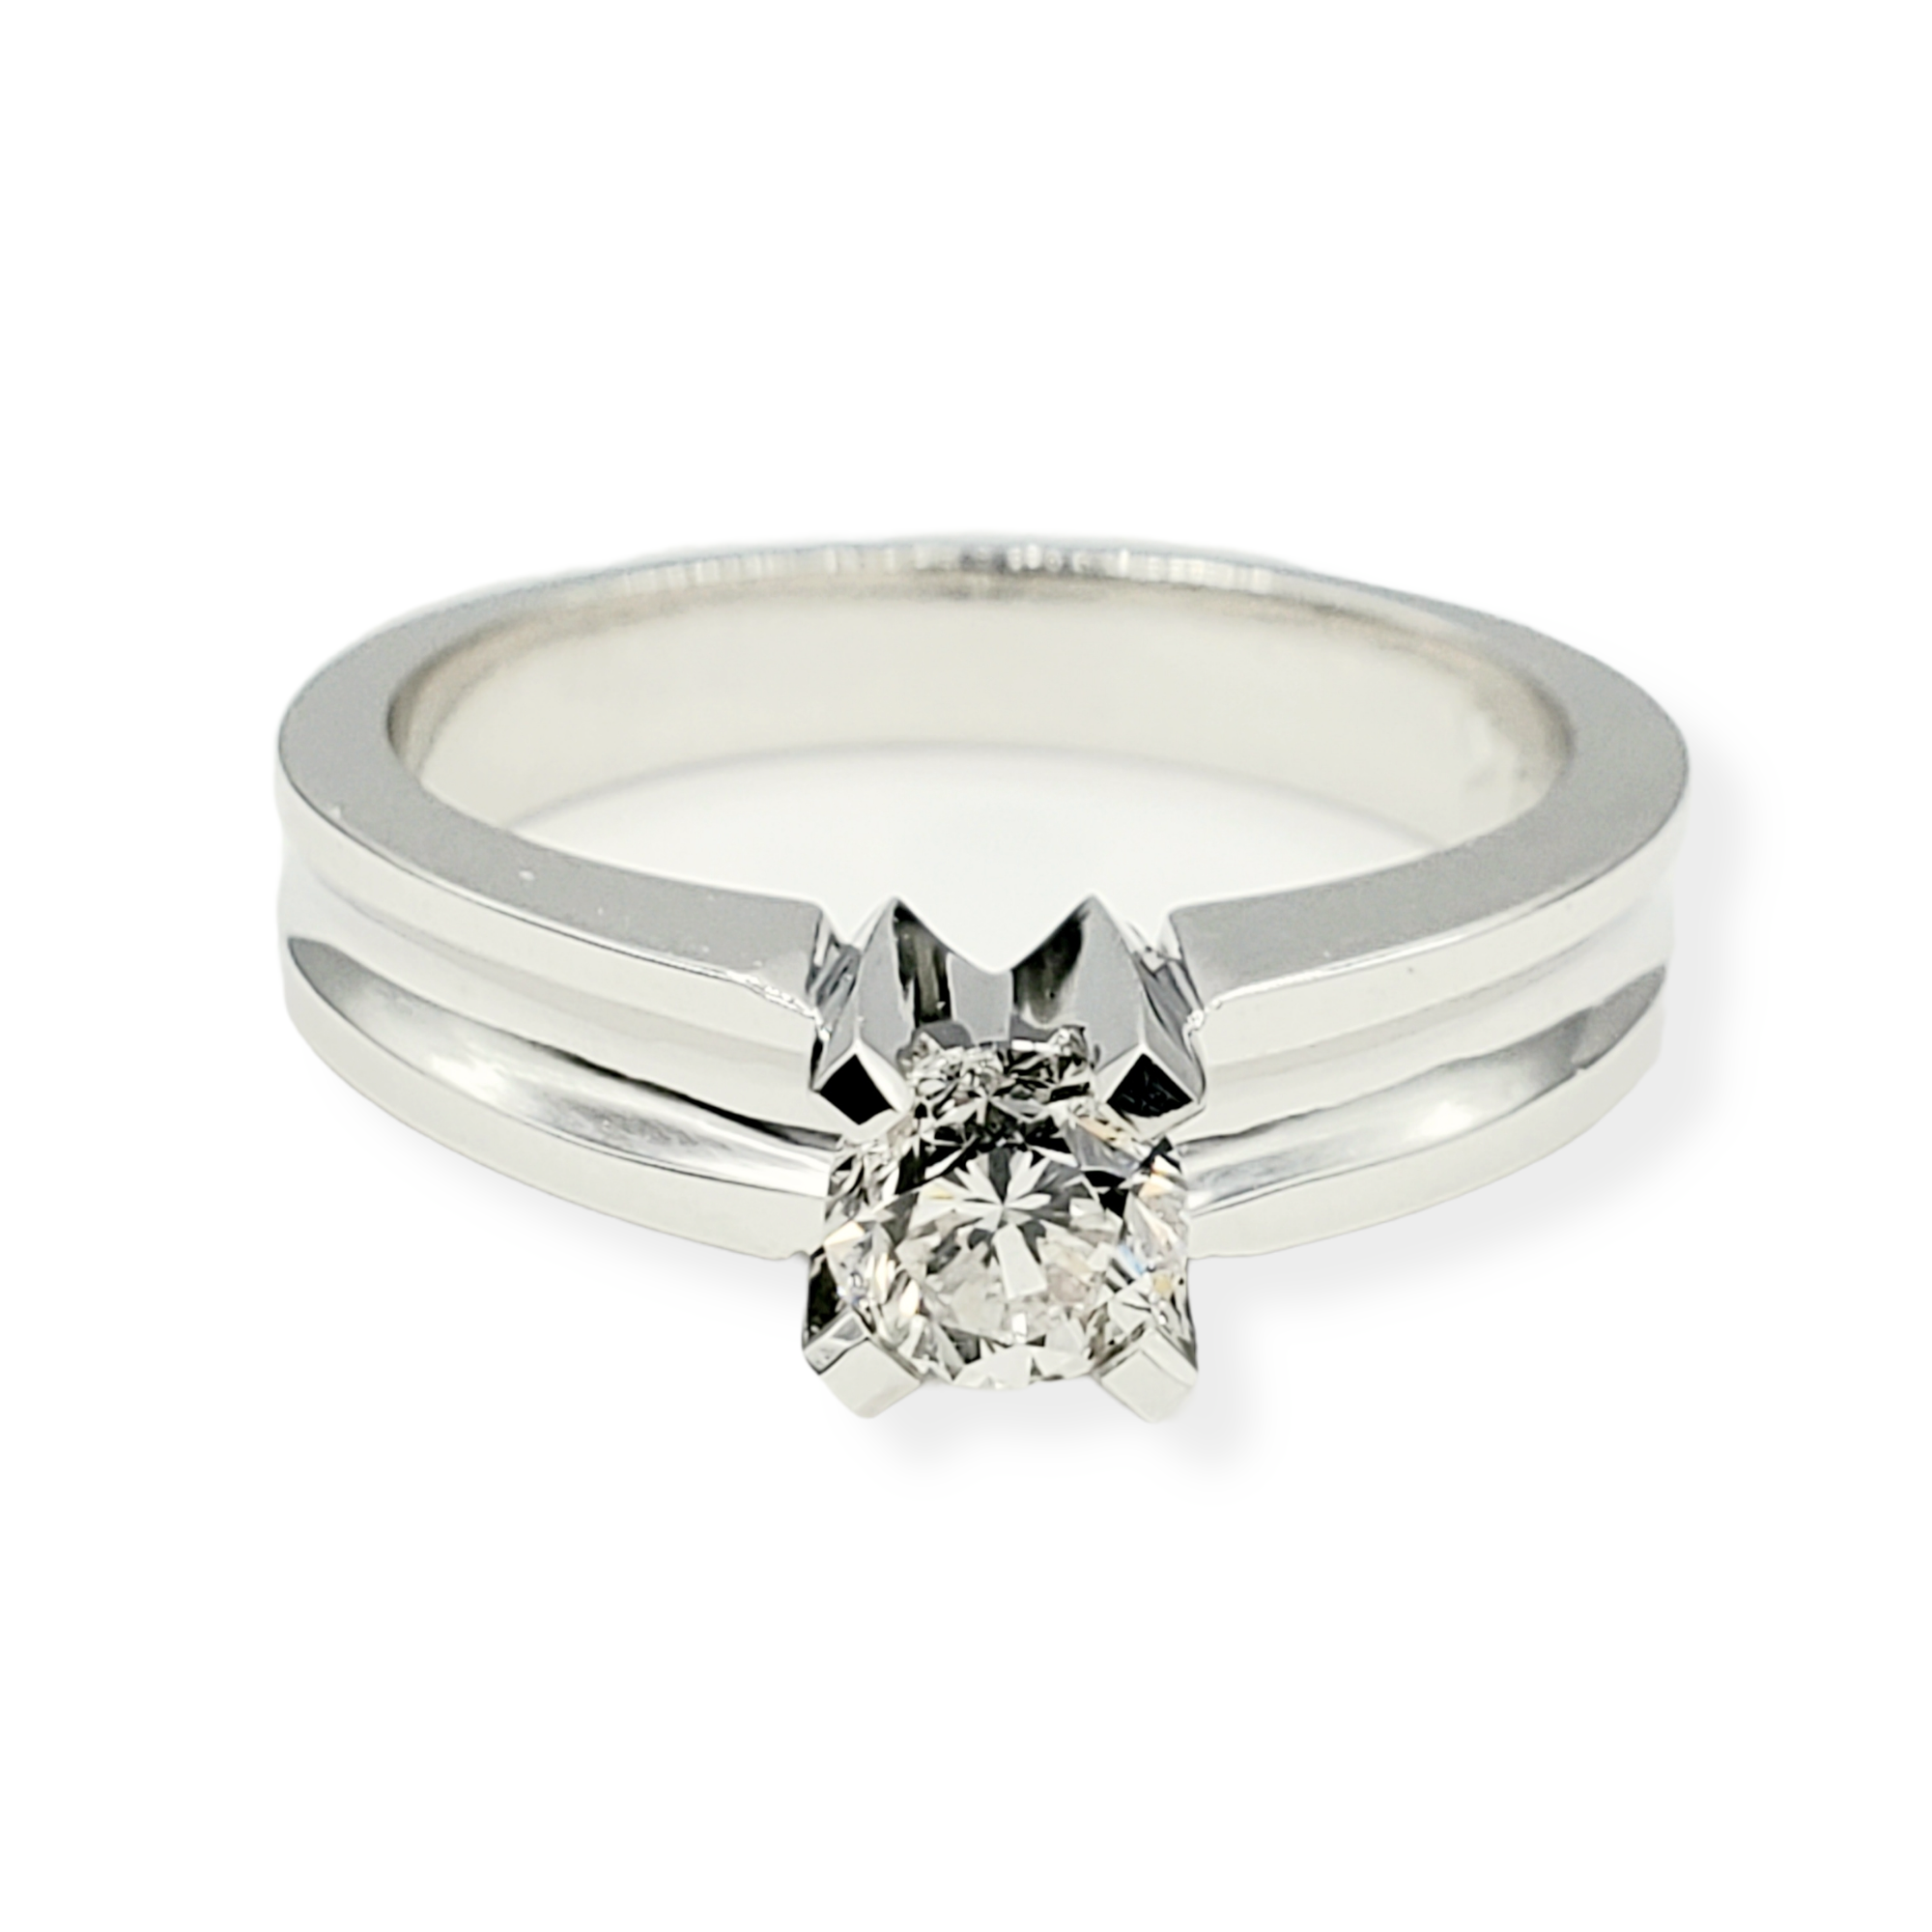 14kt white gold ring with one prong set round brilliant cut diamond 0.45ct